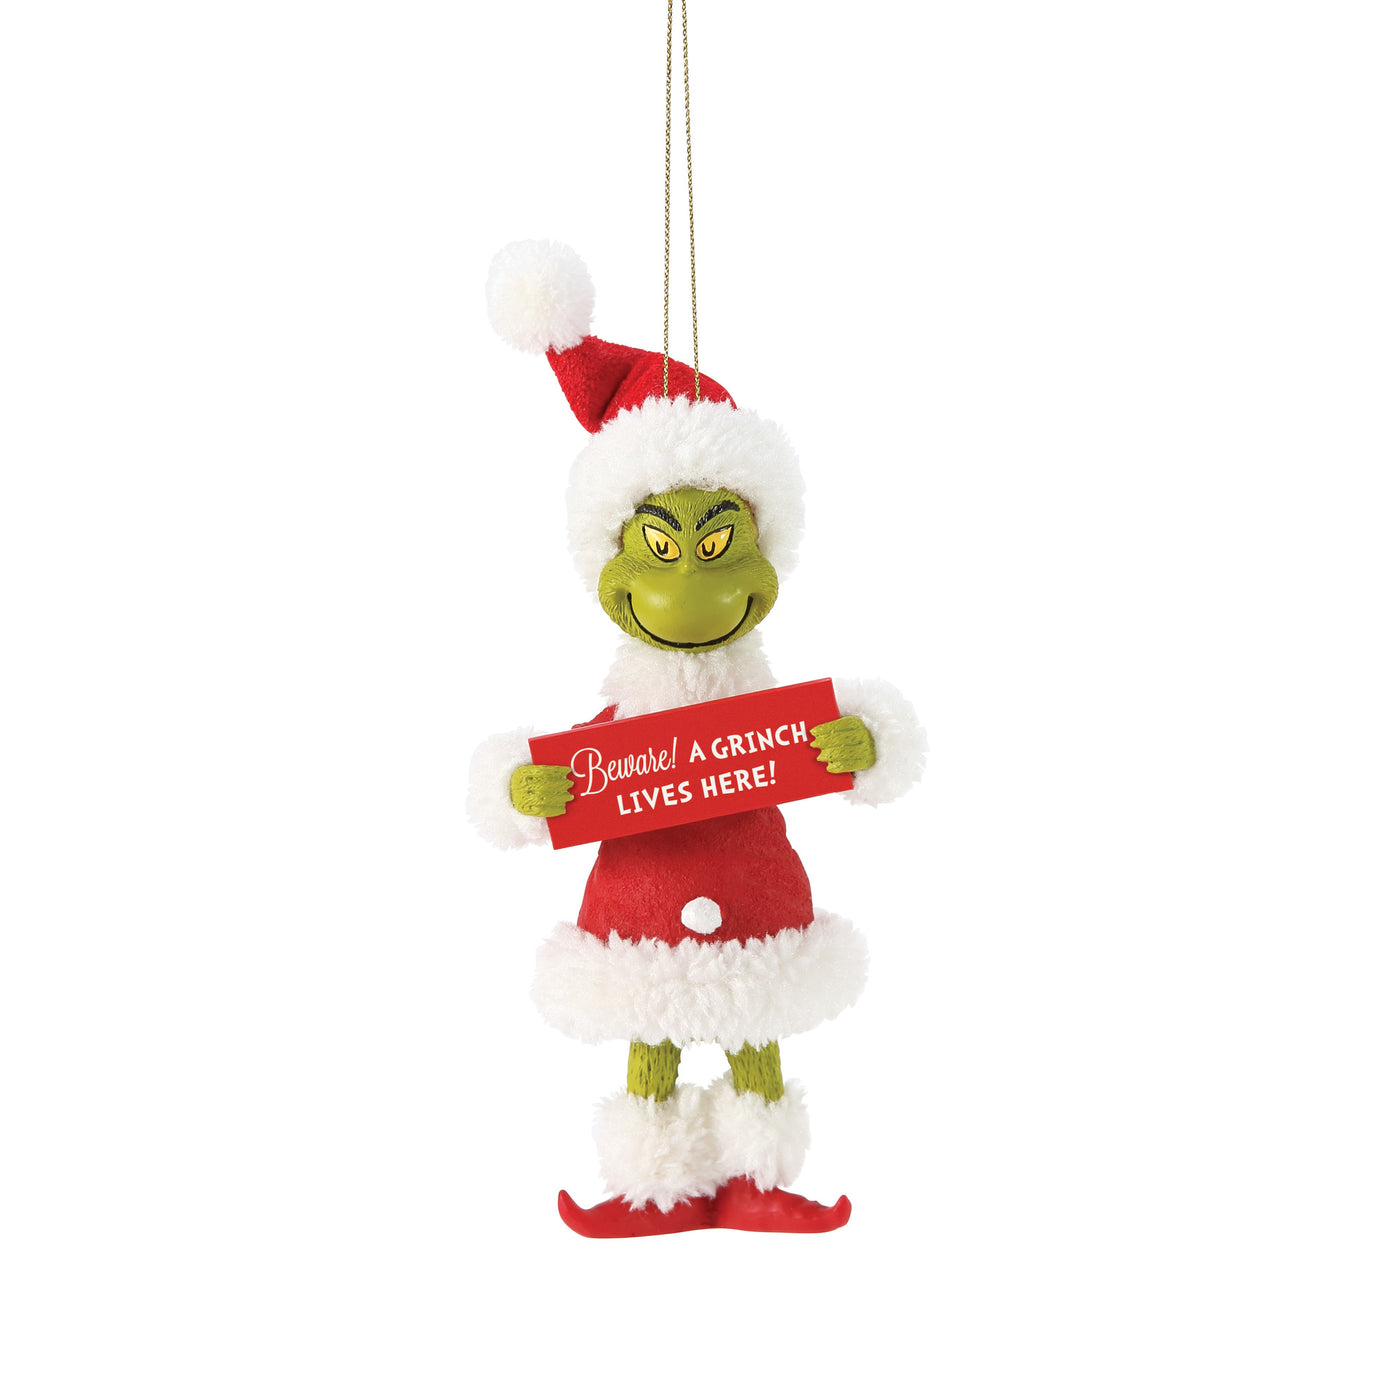 Dr. Seuss Grinch Beware! A Grinch Livers Here! Ornament New